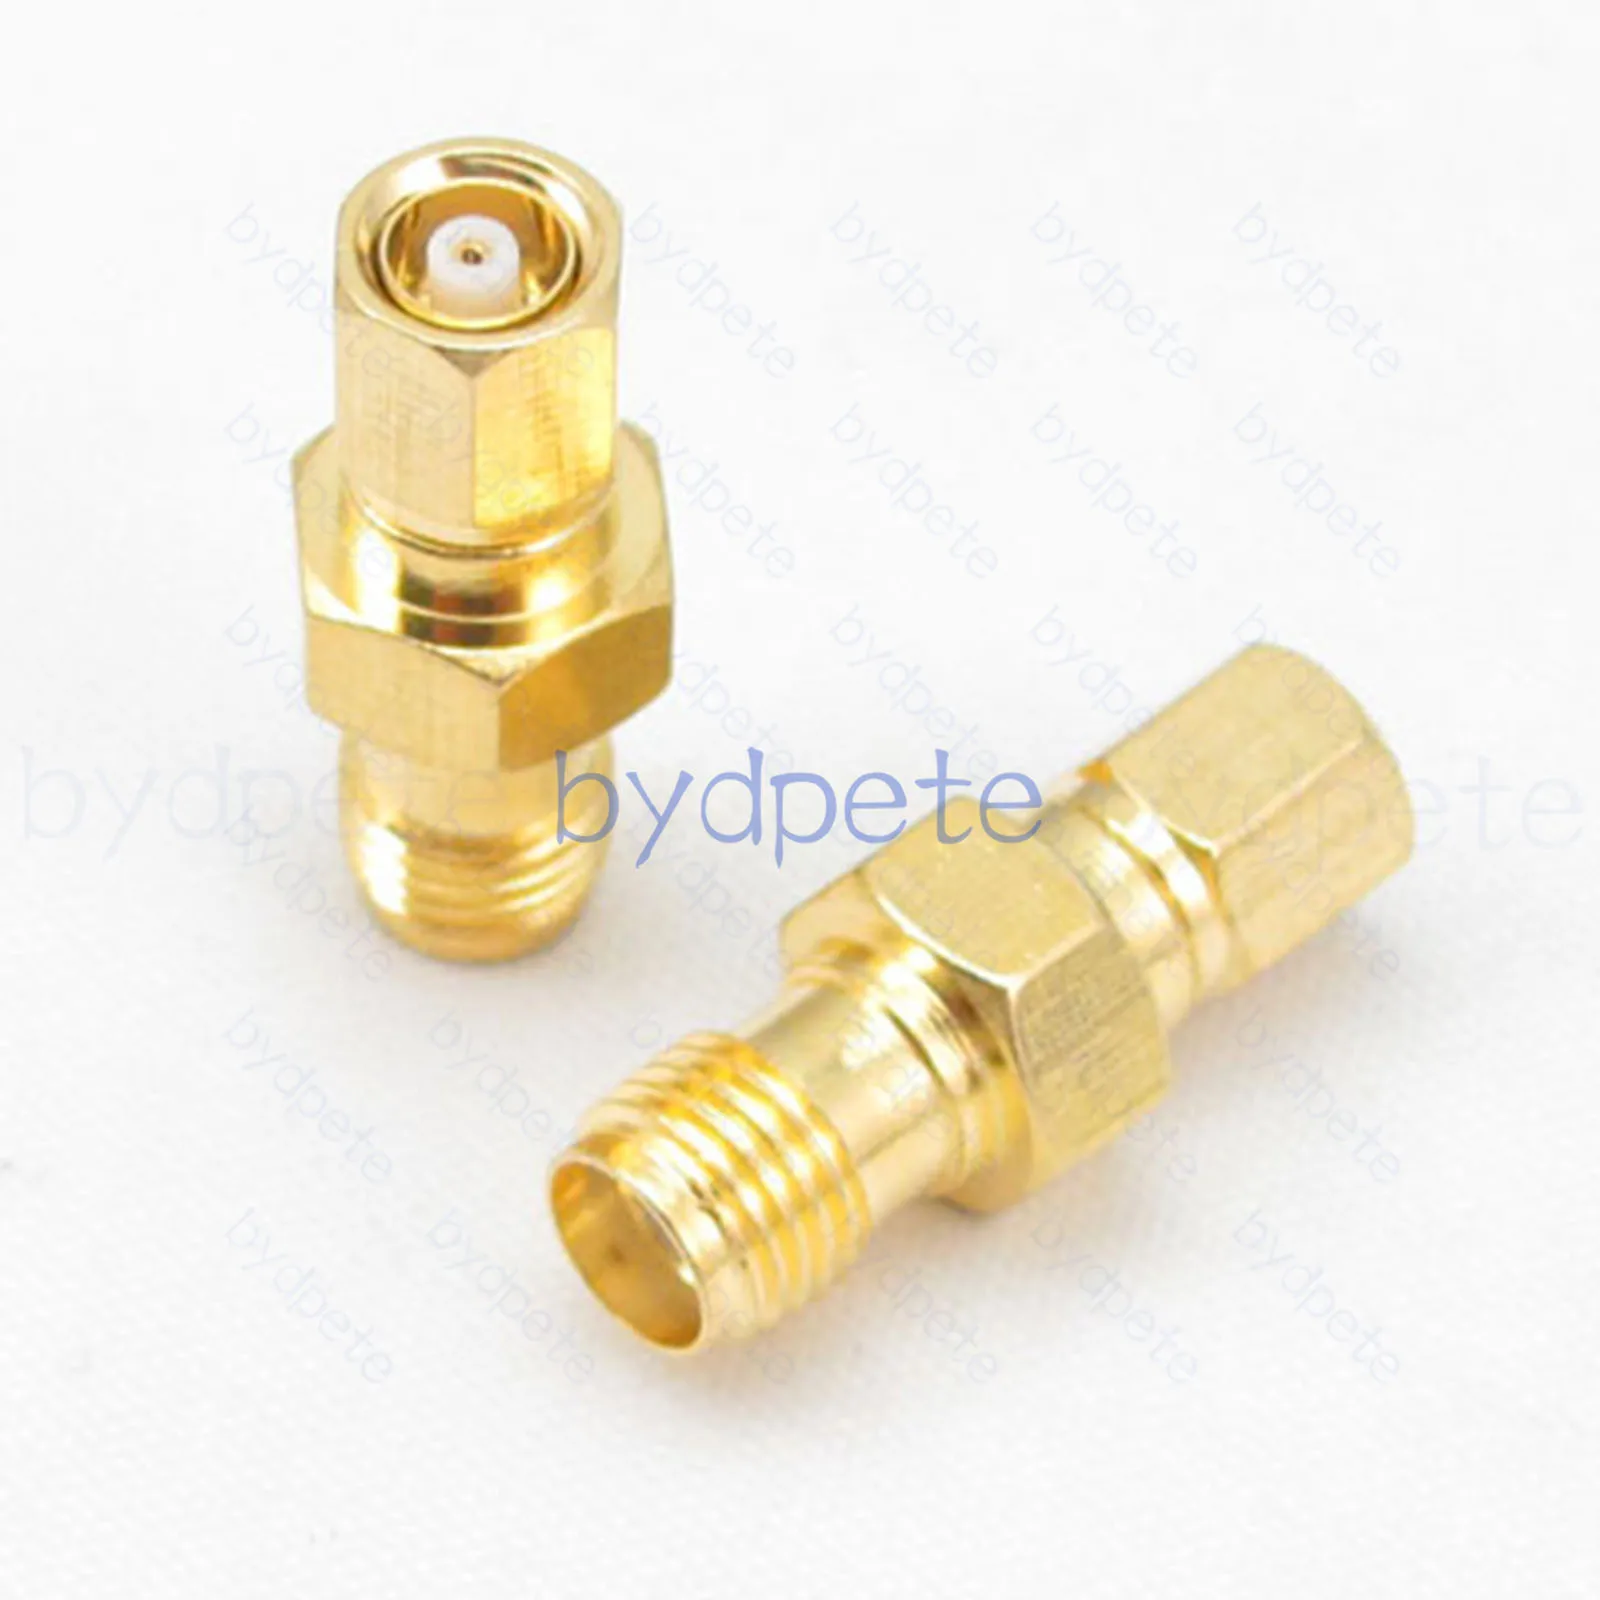 

SMC Male to SMA Female Jack Straight RF Connector Adapter 50ohm bydpete plug Tanger